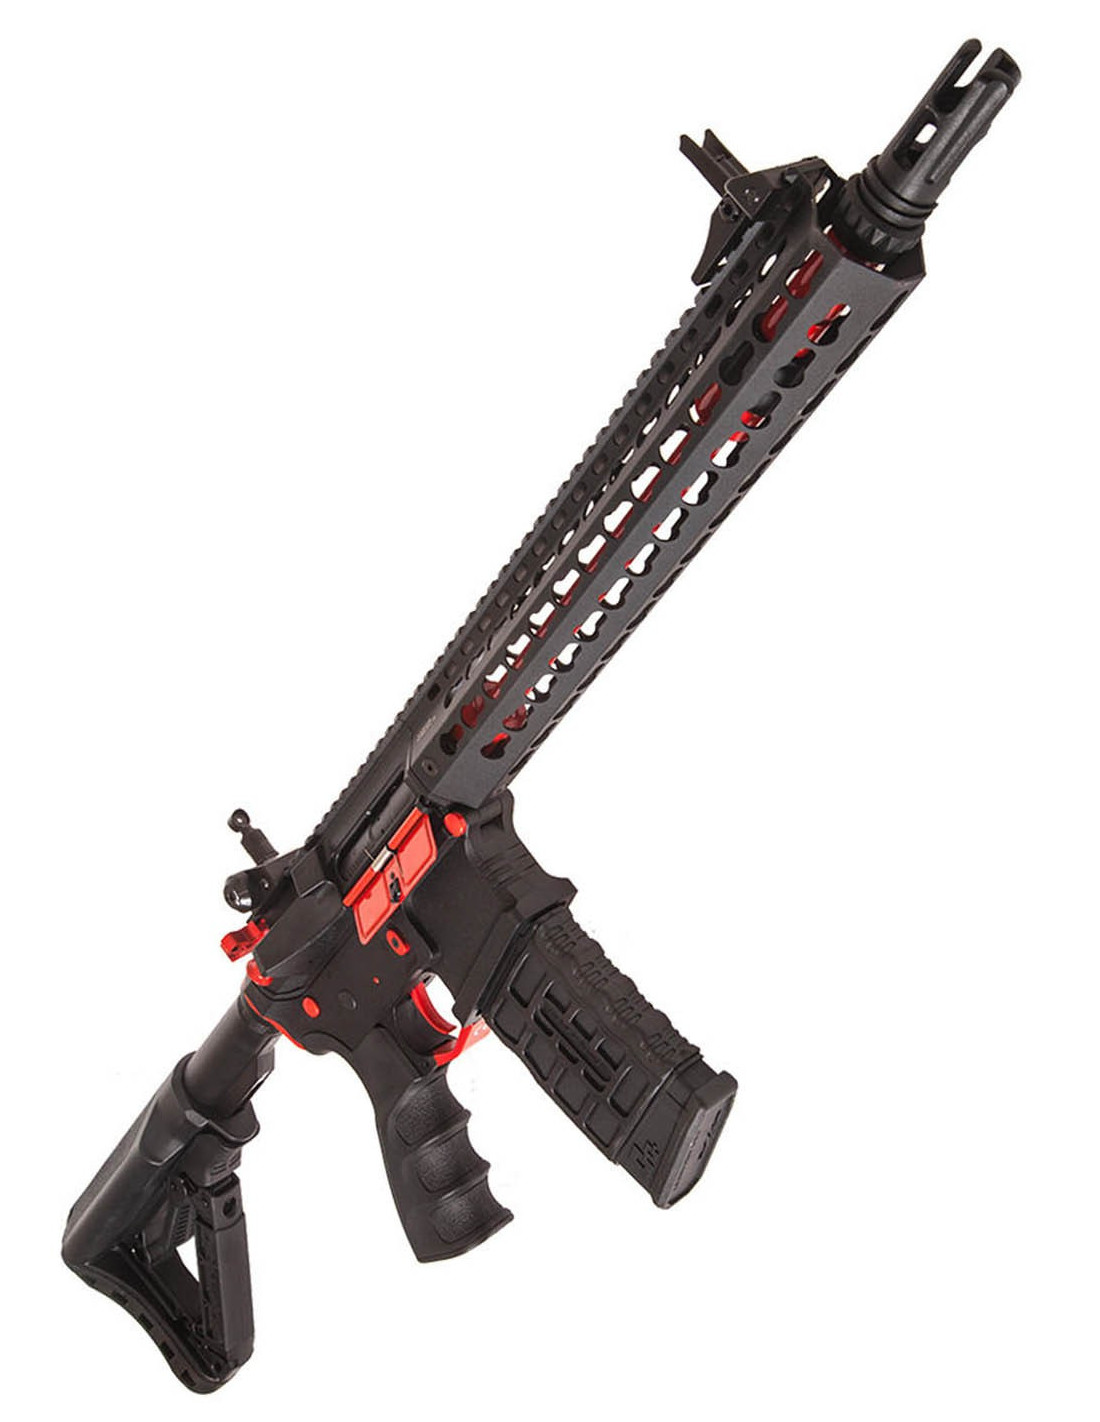 Assault Rifle M4 Aeg Cm16 Srxl Red Edition With Mosfet Aeg